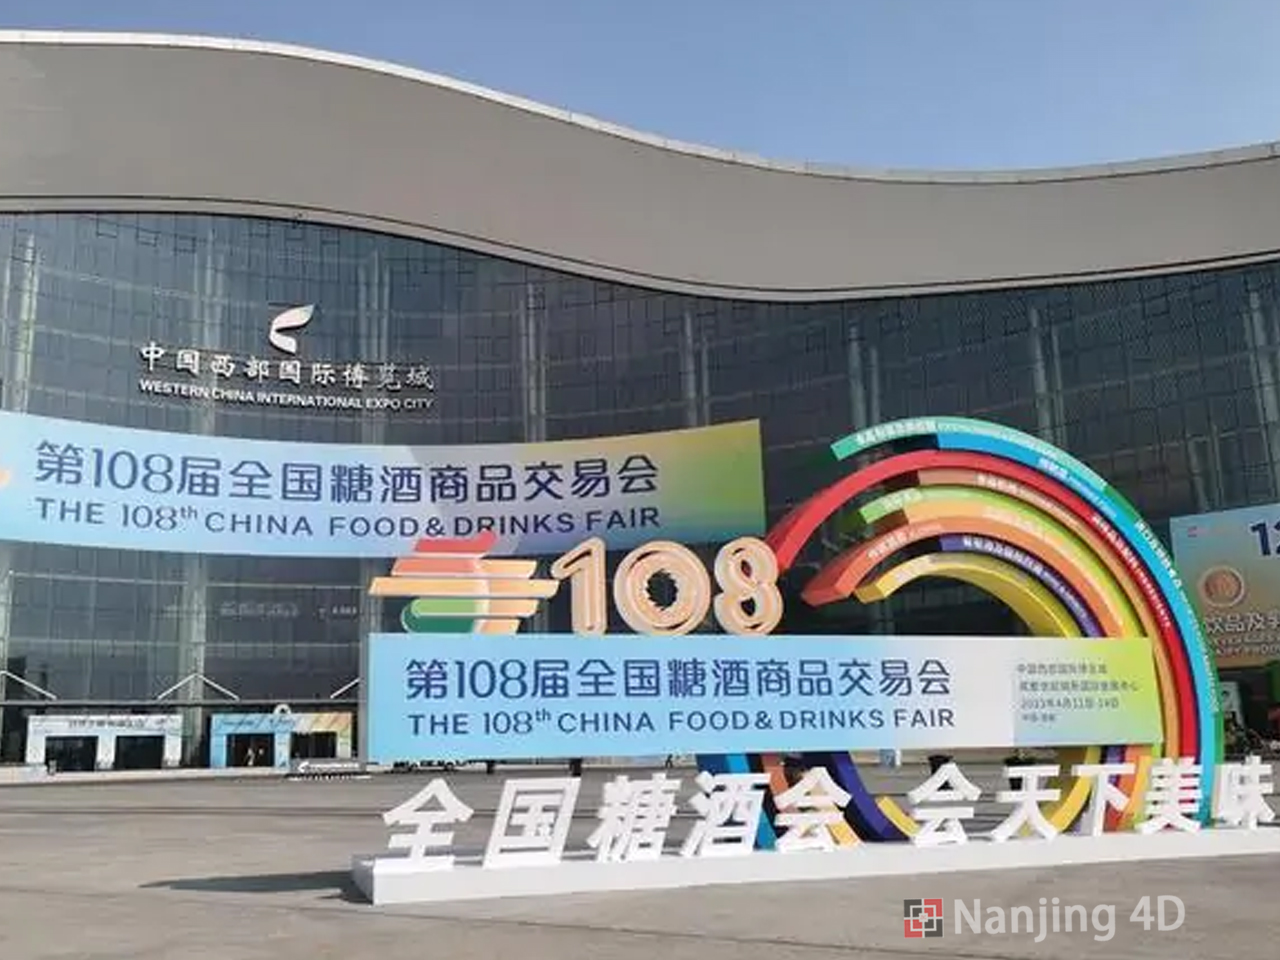 The 108th National Food and Drinks Fair  ended successfully in Chengdu